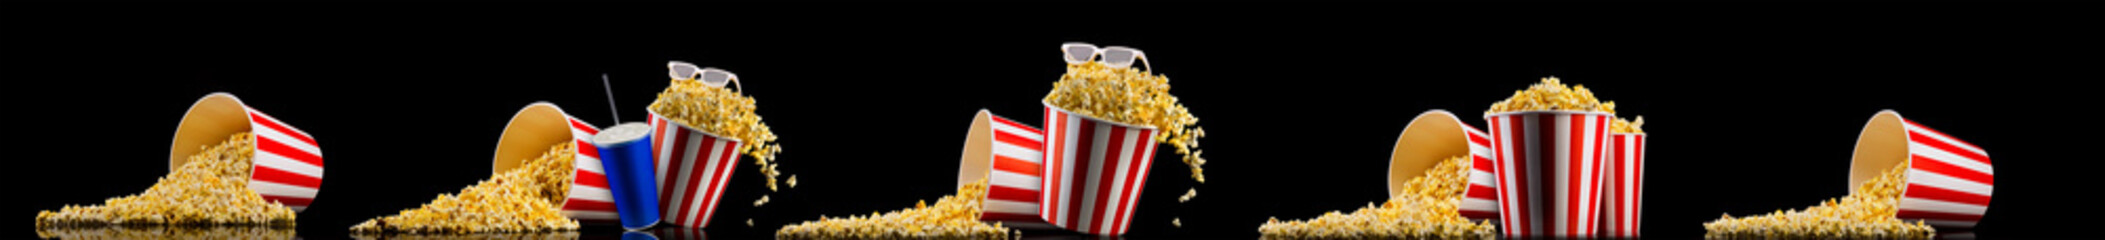 Set of bucket with popcorn and 3D glasses isolated on black background